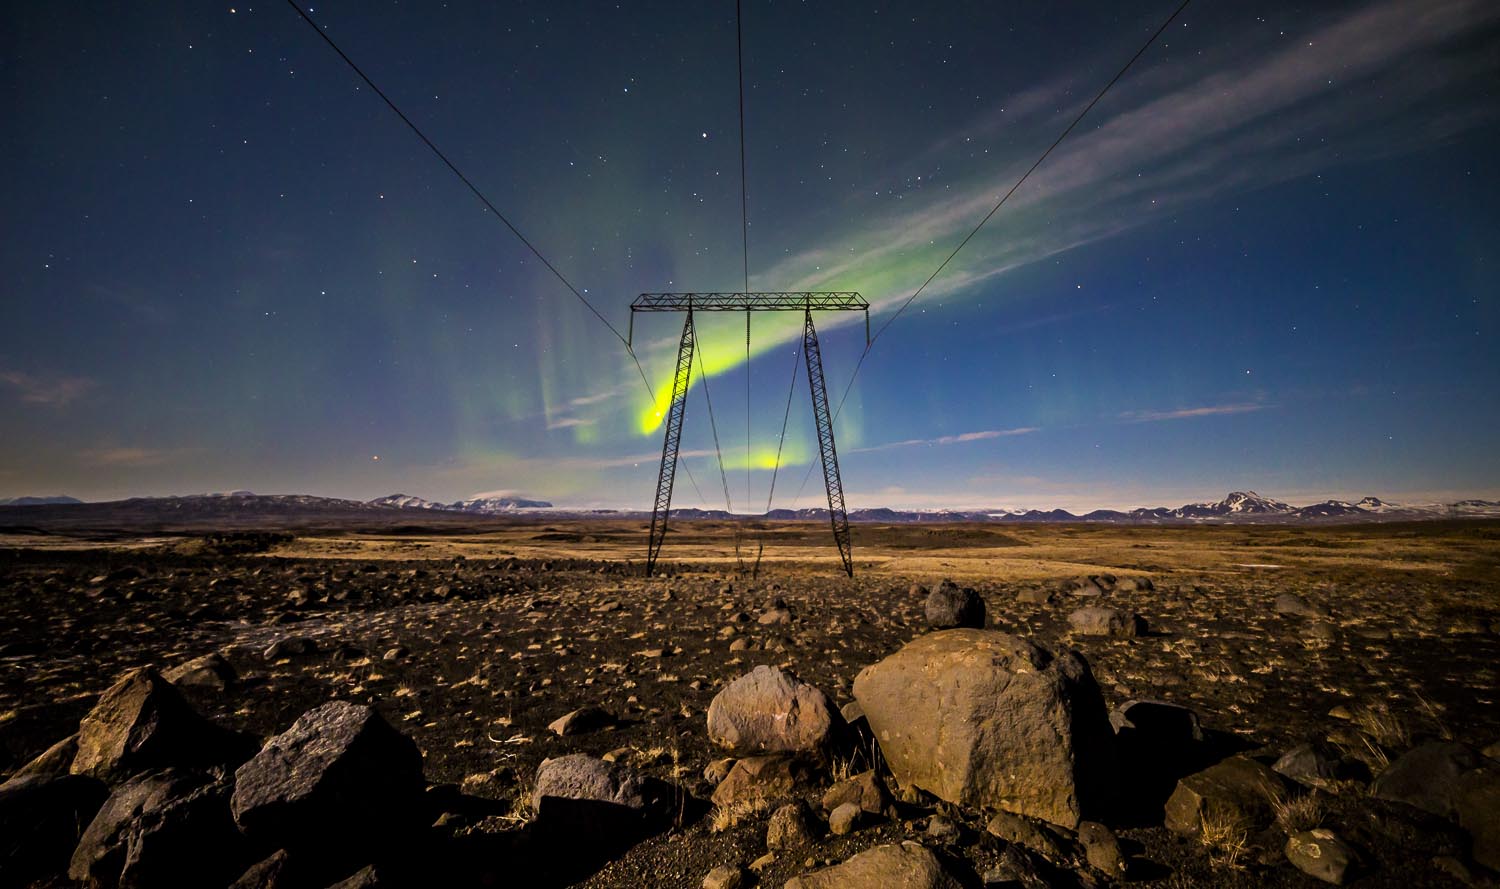 Northern lights flare up in central Iceland